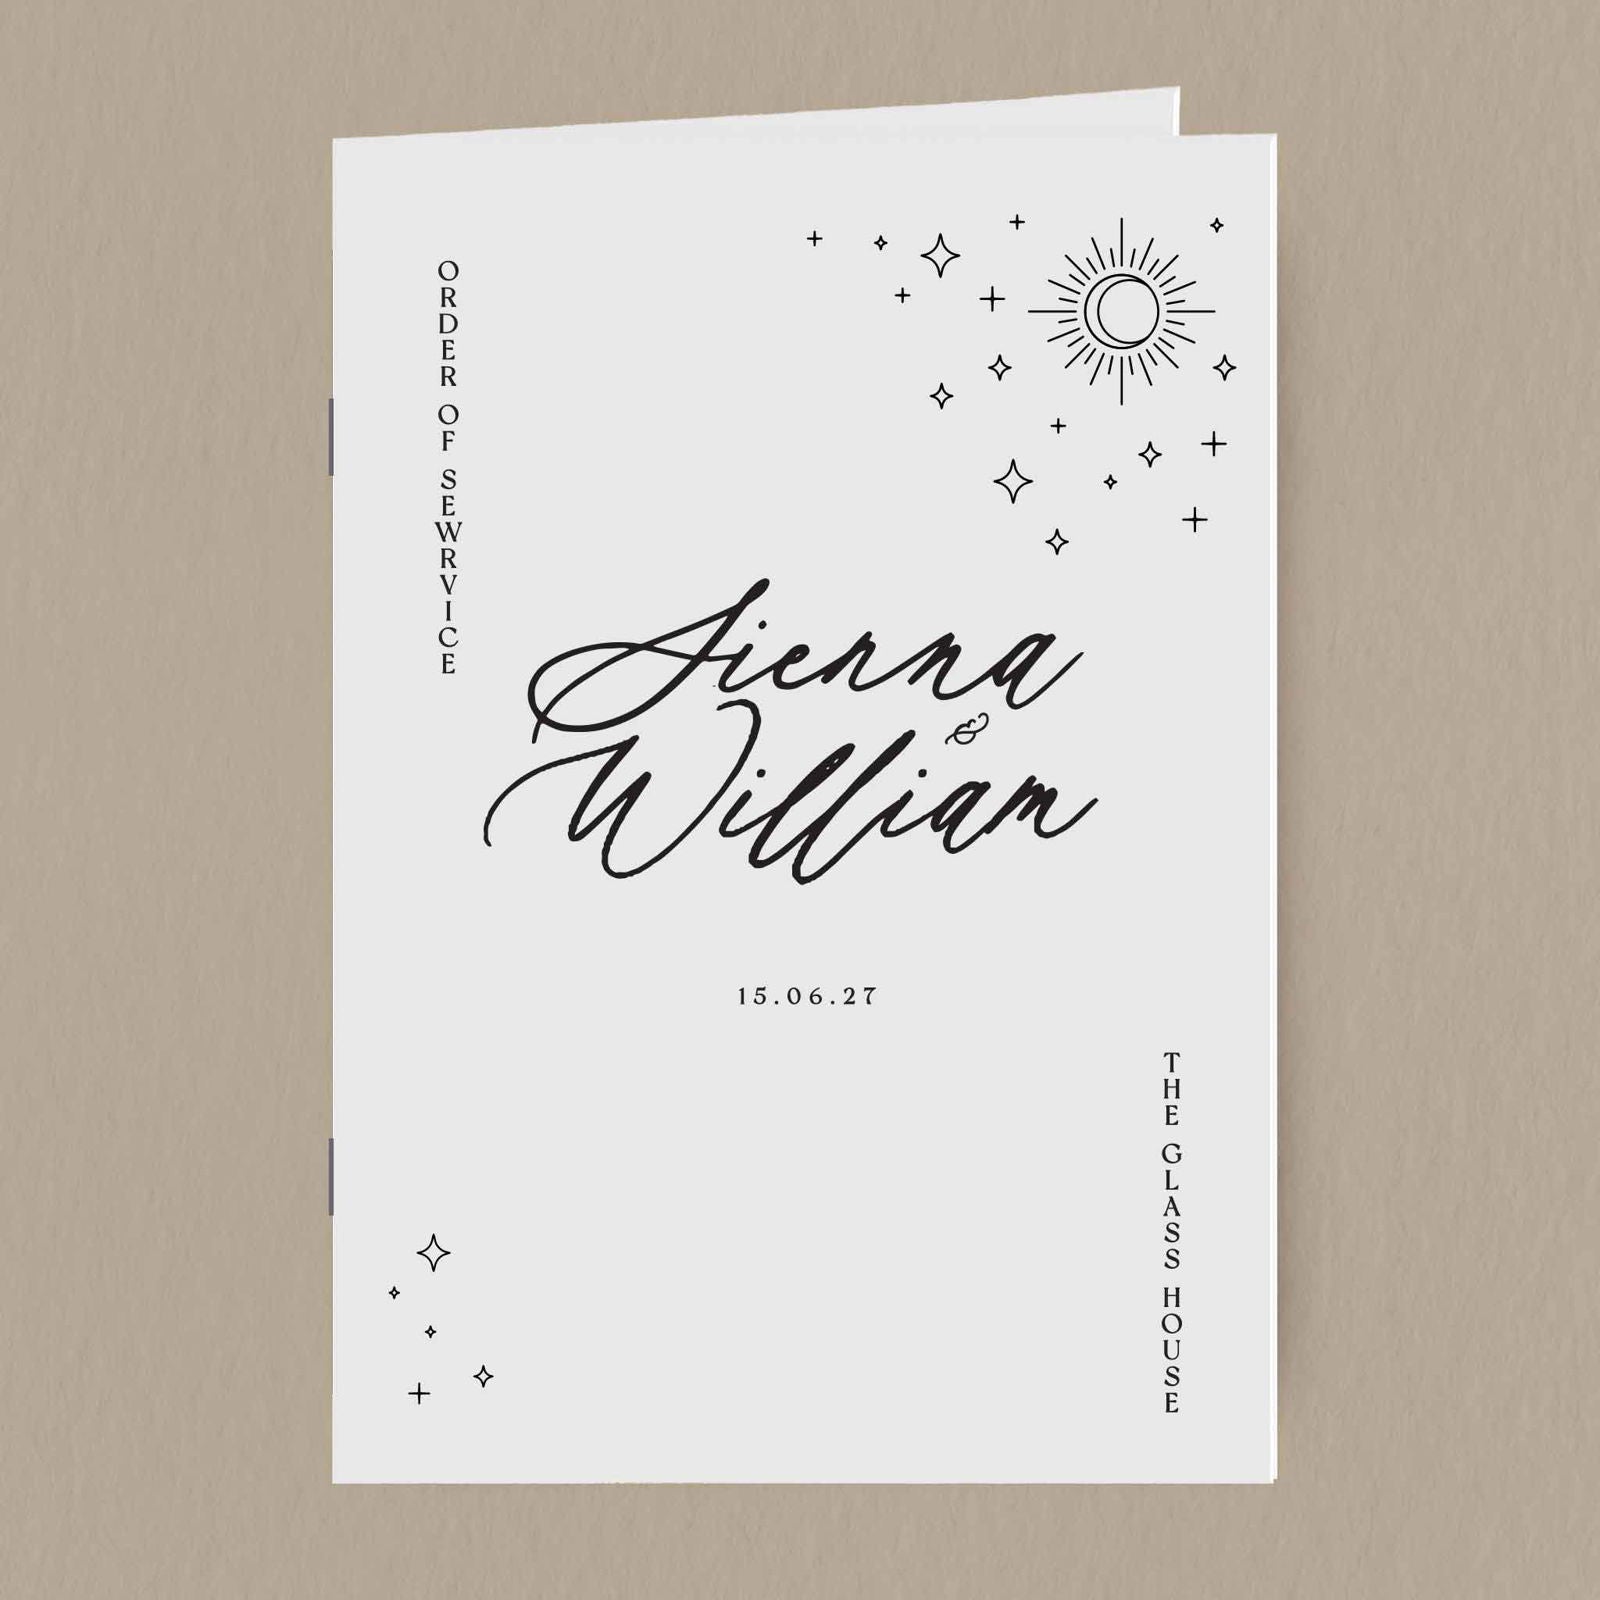 Sienna Order Of Service  Ivy and Gold Wedding Stationery   